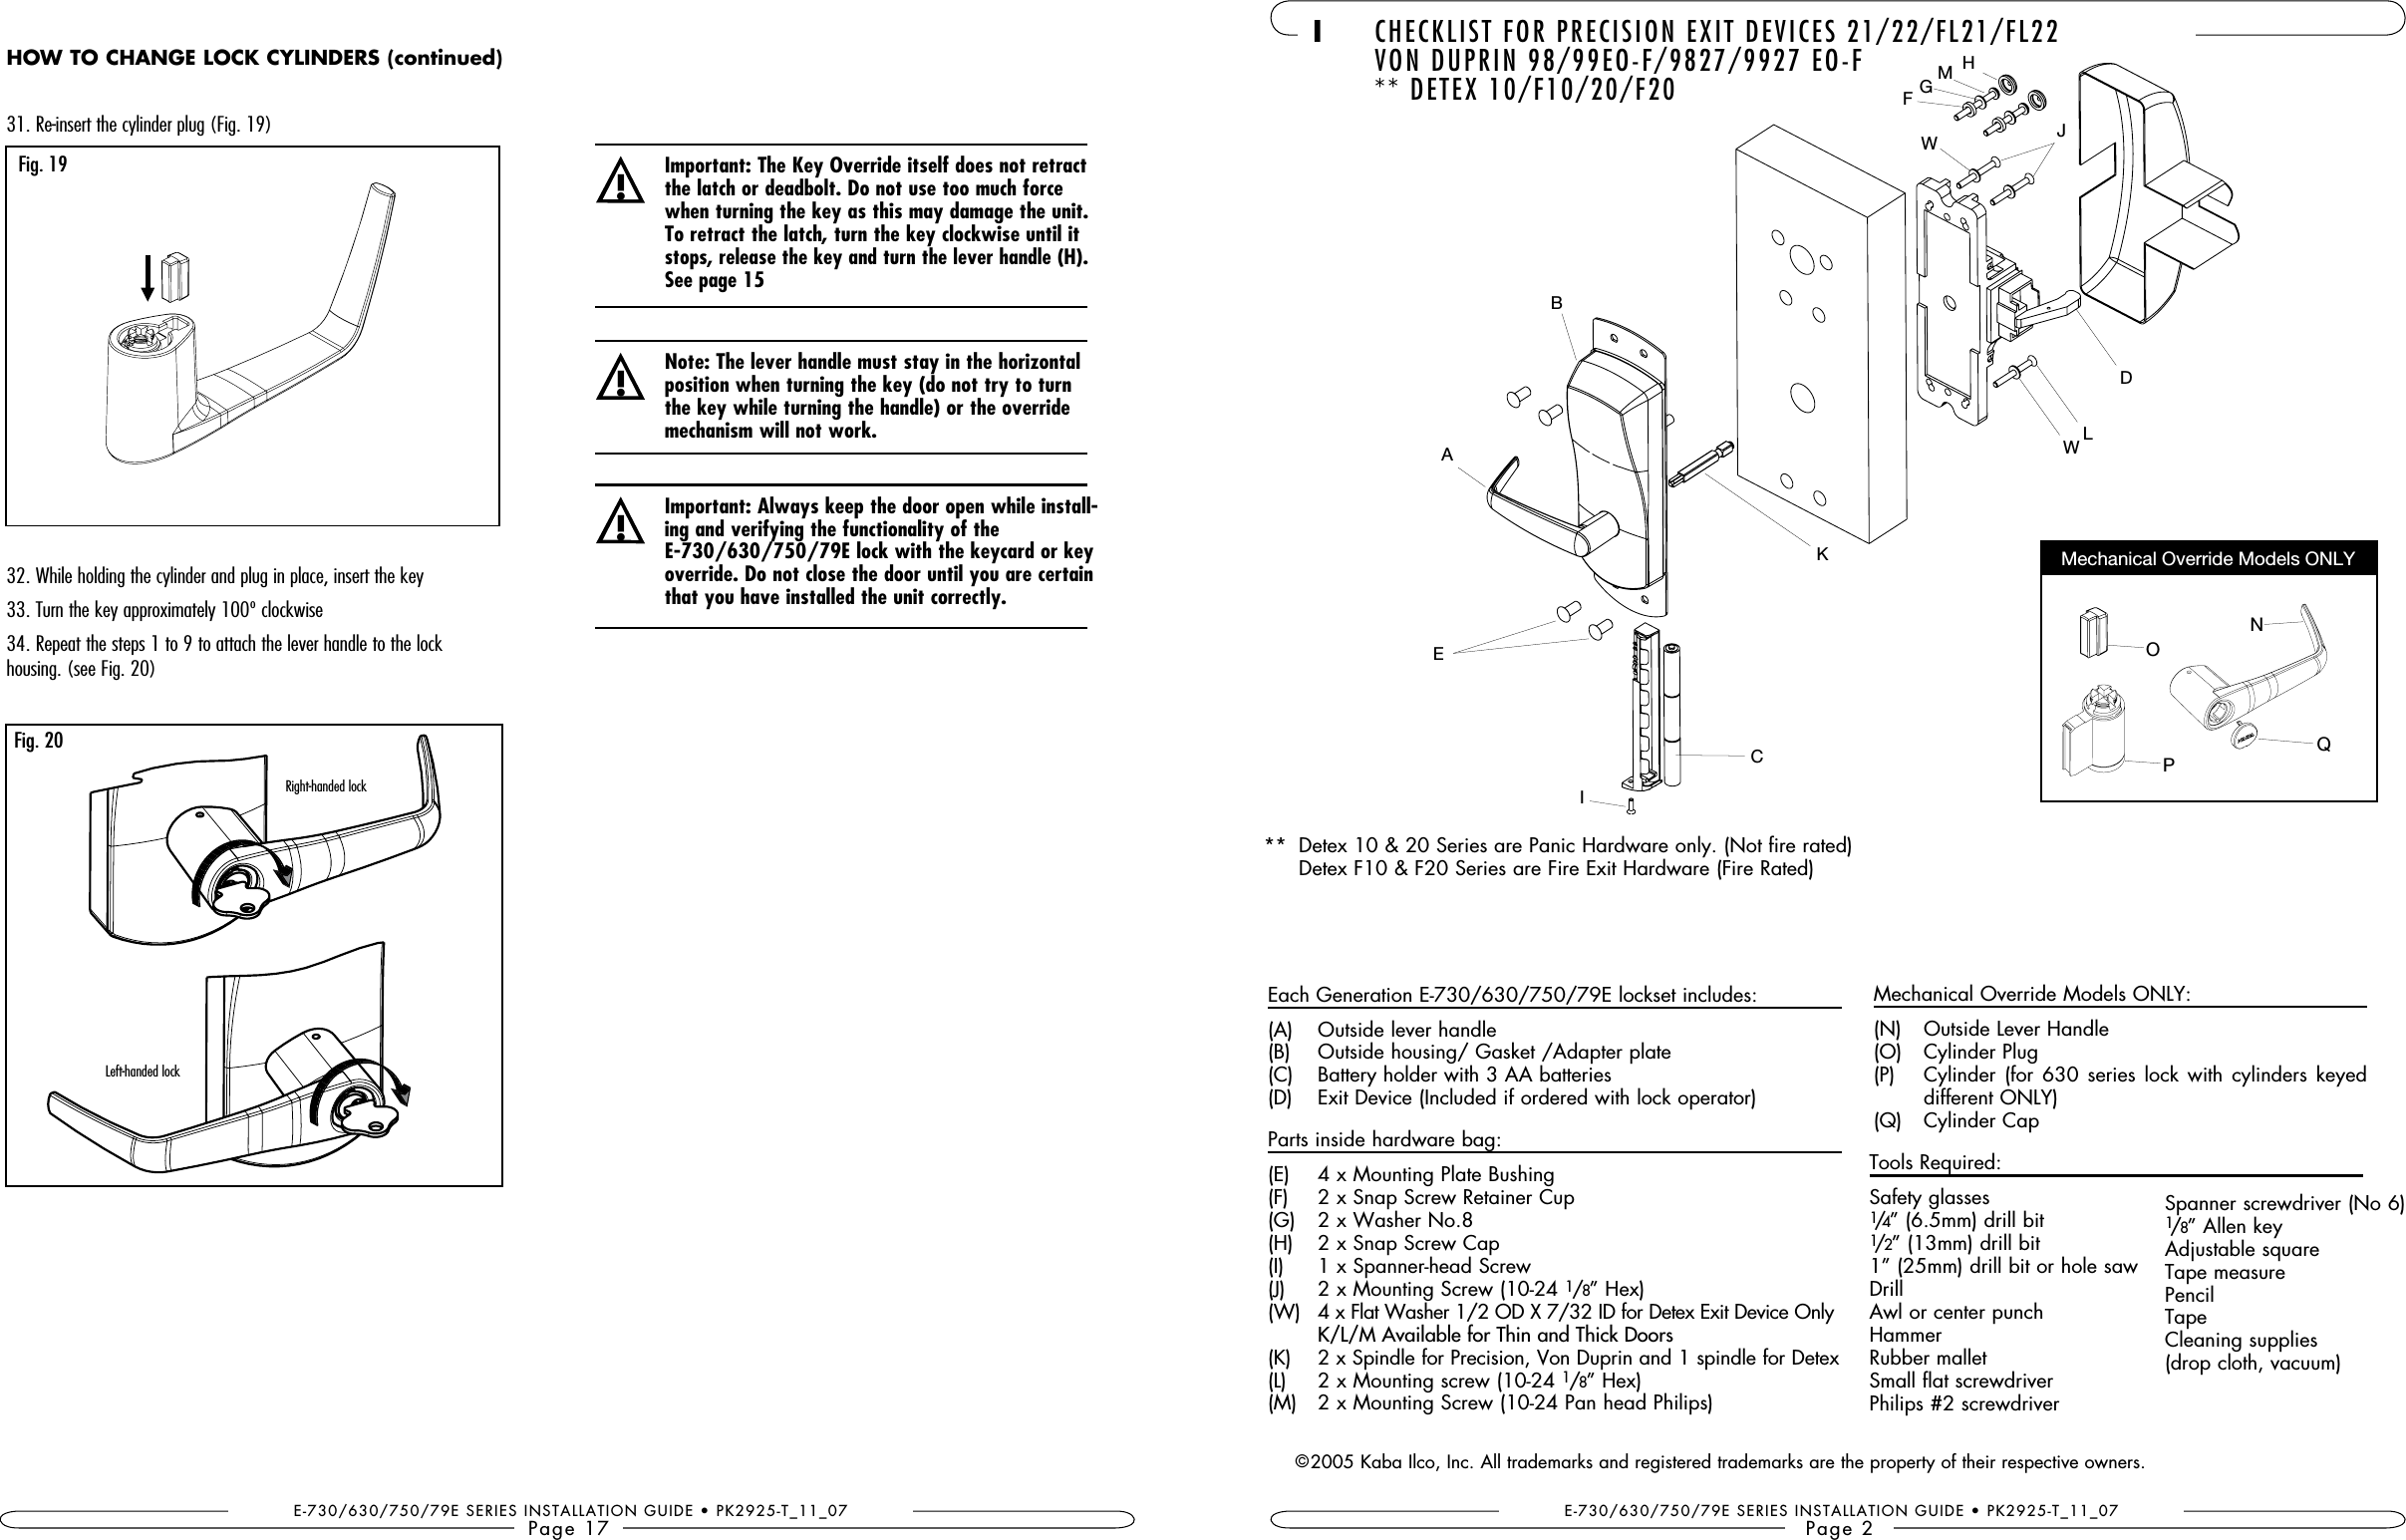 E-730/630/750/79E SERIES INSTALLATION GUIDE • PK2925-T_11_07Page 1731. Re-insert the cylinder plug (Fig. 19)32. While holding the cylinder and plug in place, insert the key33. Turn the key approximately 100º clockwise34. Repeat the steps 1 to 9 to attach the lever handle to the lock  housing. (see Fig. 20)!the latch or deadbolt. Do not use too much force when turning the key as this may damage the unit. To retract the latch, turn the key clockwise until it stops, release the key and turn the lever handle (H). See page 15!Important: Always keep the door open while install-ing and verifying the functionality of the  override. Do not close the door until you are certain that you have installed the unit correctly.!Note: The lever handle must stay in the horizontal position when turning the key (do not try to turn the key while turning the handle) or the override mechanism will not work.Fig. 20Fig. 19Right-handed lockLeft-handed lockHOW TO CHANGE LOCK CYLINDERS (continued)Mechanical Override Models ONLY I CHECKLIST FOR PRECISION EXIT DEVICES 21/22/FL21/FL22  VON DUPRIN 98/99EO-F/9827/9927 EO-F  ** DETEX 10/F10/20/F20E-730/630/750/79E SERIES INSTALLATION GUIDE • PK2925-T_11_07Page 2Each Generation E-730/630/750/79E lockset includes:(A)  Outside lever handle(B)  Outside housing/ Gasket /Adapter plate(C)  Battery holder with 3 AA batteries(D)  Exit Device (Included if ordered with lock operator)Parts inside hardware bag:(E)  4 x Mounting Plate Bushing(F)  2 x Snap Screw Retainer Cup(G)  2 x Washer No.8(H)  2 x Snap Screw Cap(I )  1 x Spanner-head Screw(J)  2 x Mounting Screw (10-24 1/8” Hex)(W)   4 x Flat Washer 1/2 OD X 7/32 ID for Detex Exit Device Only  K/L/M Available for Thin and Thick Doors(K)   2 x Spindle for Precision, Von Duprin and 1 spindle for Detex(L)   2 x Mounting screw (10-24 1/8” Hex)(M )  2 x Mounting Screw (10-24 Pan head Philips)Tools Required:Safety glasses1/4” (6.5mm) drill bit1/2” (13mm) drill bit1” (25mm) drill bit or hole sawDrillAwl or center punchHammer Rubber malletSmall flat screwdriver Philips #2 screwdriverSpanner screwdriver (No 6)1/8” Allen keyAdjustable squareTape measurePencilTapeCleaning supplies (drop cloth, vacuum)©2005 Kaba Ilco, Inc. All trademarks and registered trademarks are the property of their respective owners.AEIBJFHMKDLQCMechanical Override Models ONLY:(N)  Outside Lever Handle(O)  Cylinder Plug(P)   Cylinder (for  630  series  lock  with  cylinders  keyed different ONLY)(Q)  Cylinder CapPONG**   Detex 10 &amp; 20 Series are Panic Hardware only. (Not fire rated)  Detex F10 &amp; F20 Series are Fire Exit Hardware (Fire Rated)WW